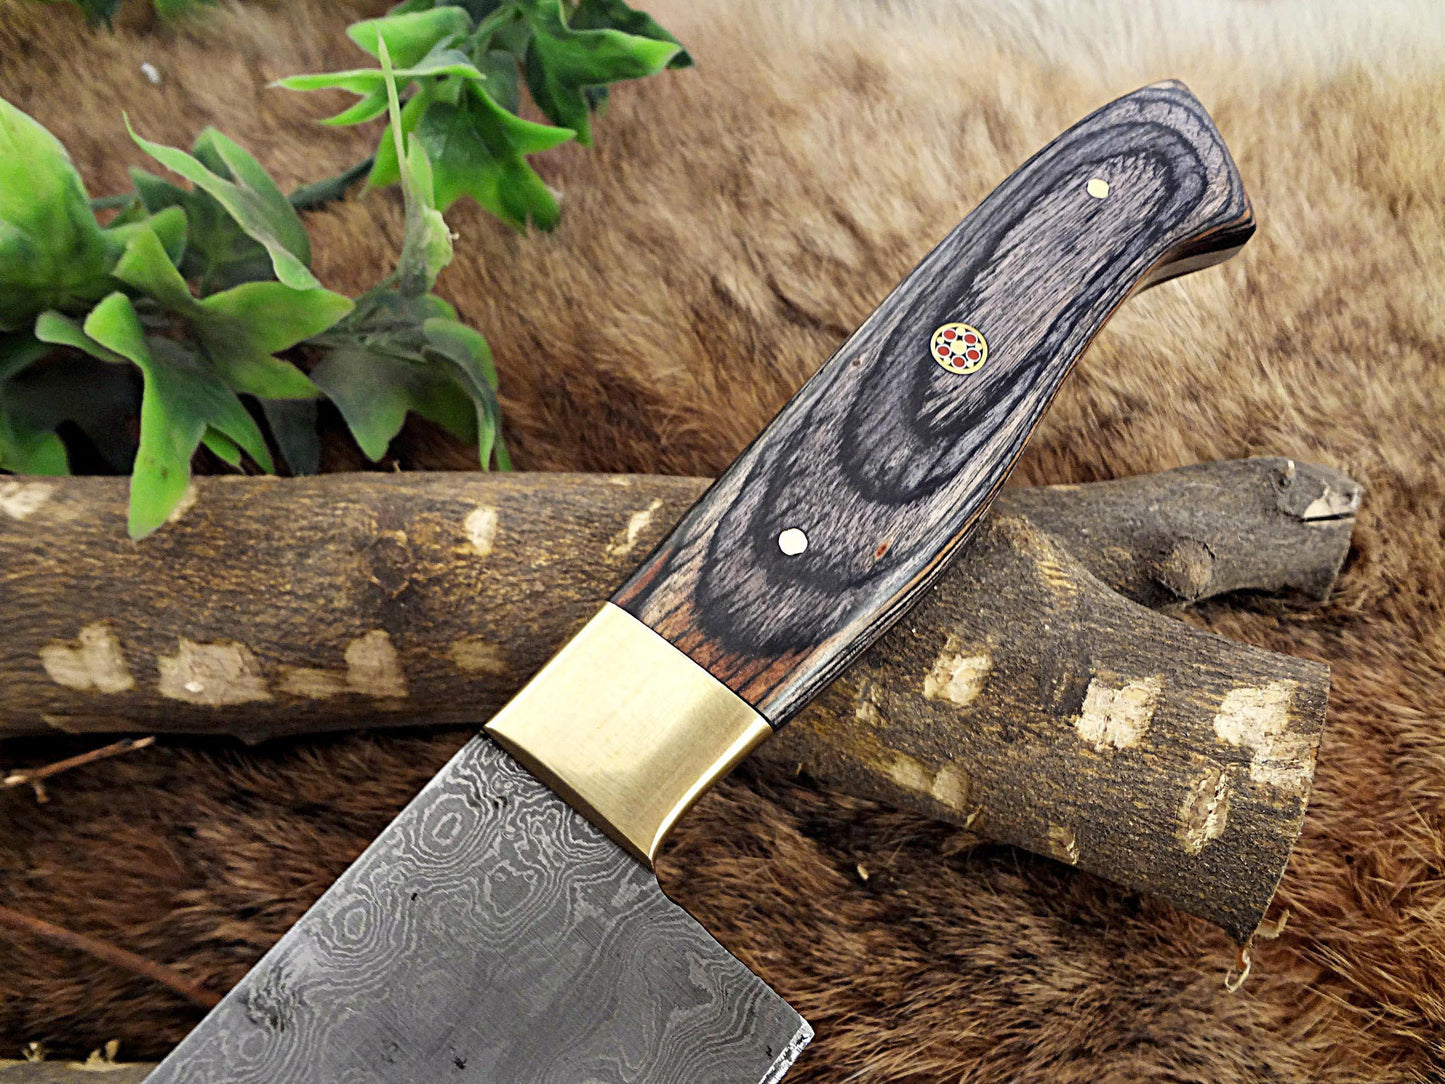 Damascus Steel kitchen Knife 14 Inches full tang 9" long Hand Forged blade, 2 Tone Dollar wood and brass bolster scale